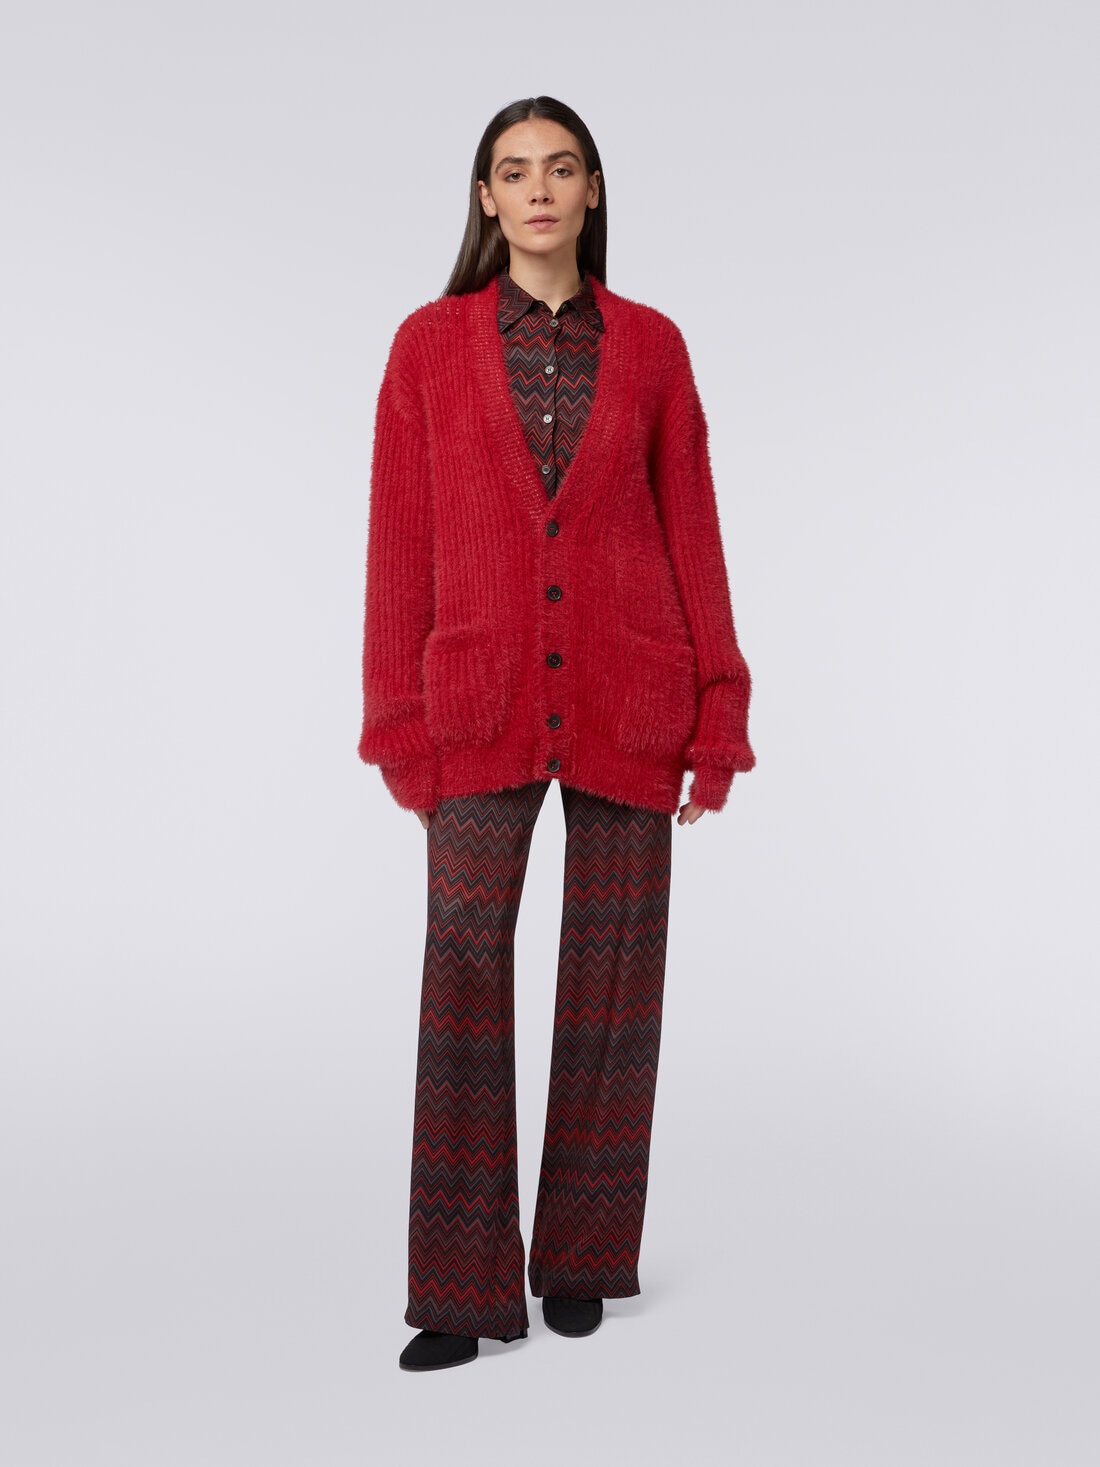 Oversized cardigan in fur-effect wool blend, Red  - DS24SM0WBK026I91559 - 1